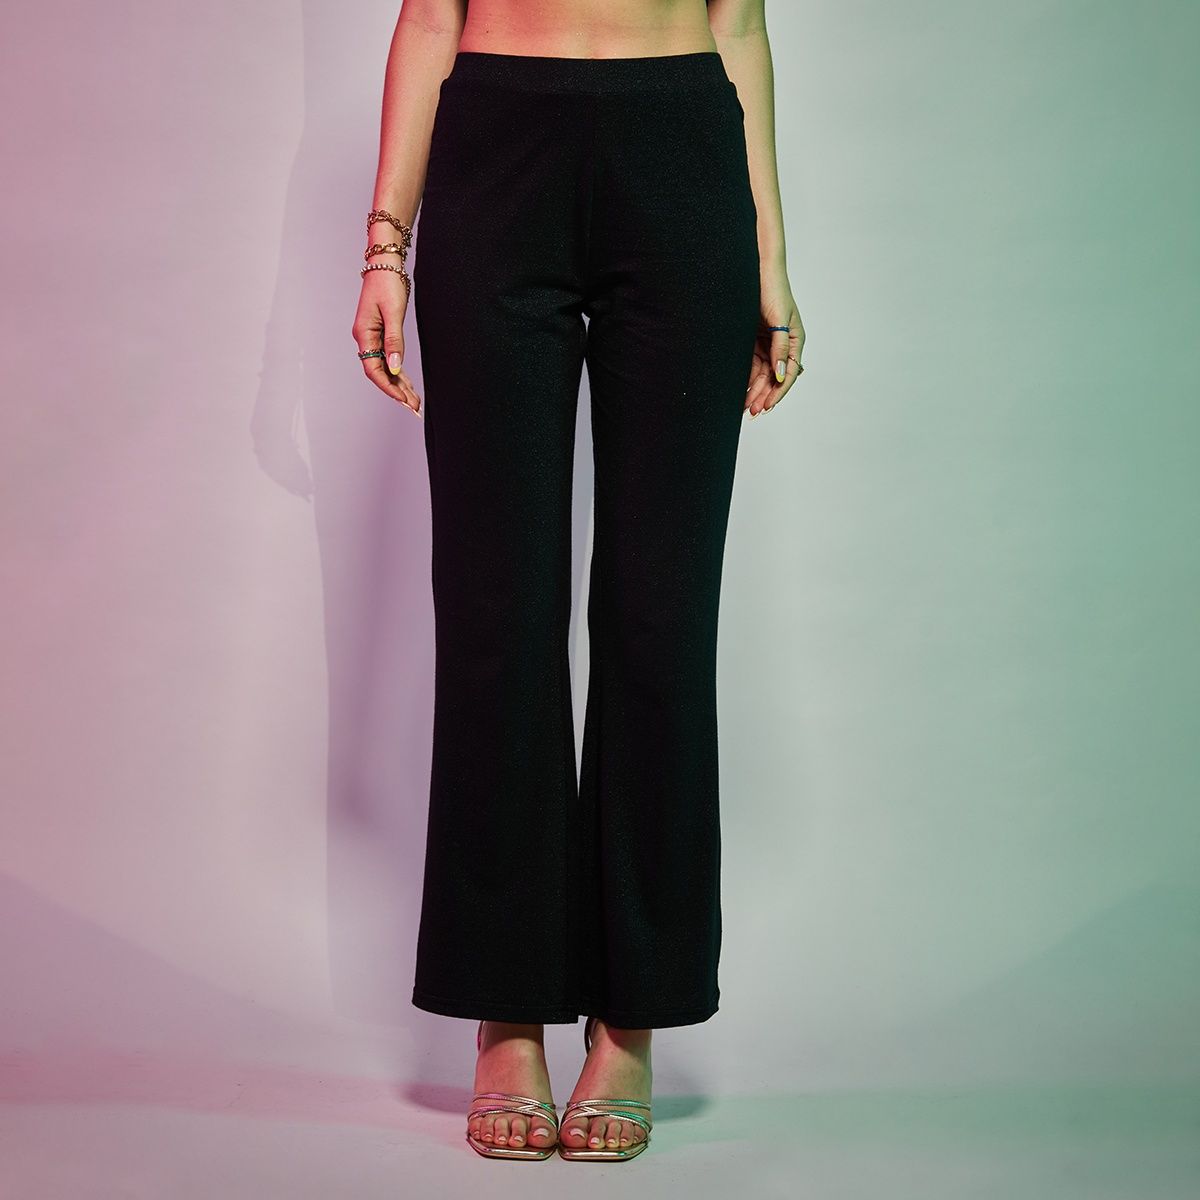 Buy Black High Rise Flared Shimmer Pants Online In India.